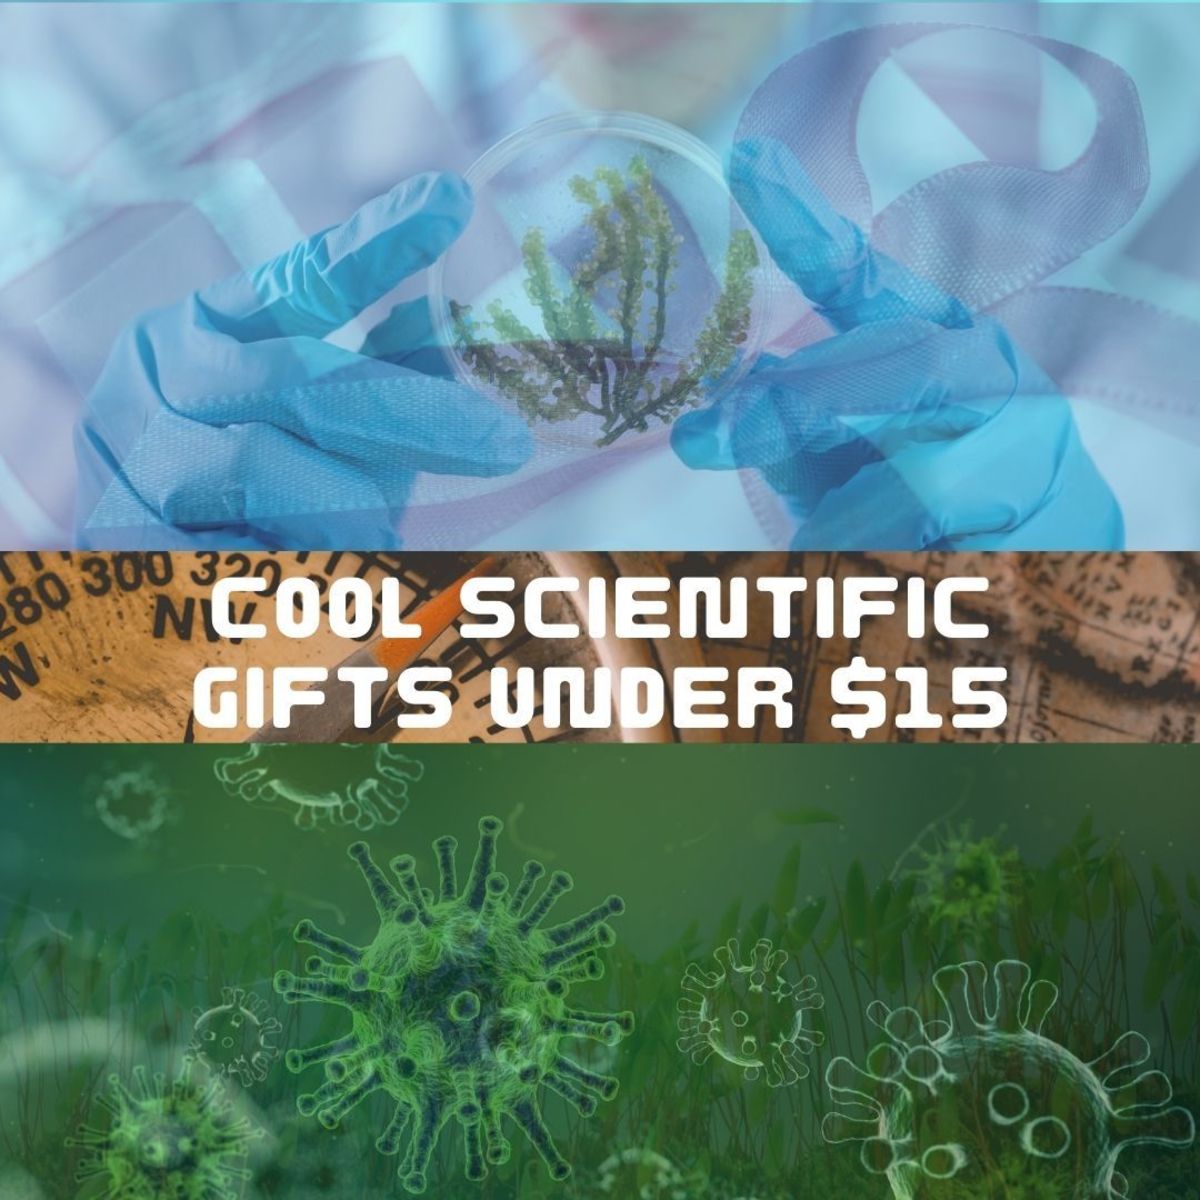 Gift guide for scientific gifts under $15, great for science lovers or science gifts for adults